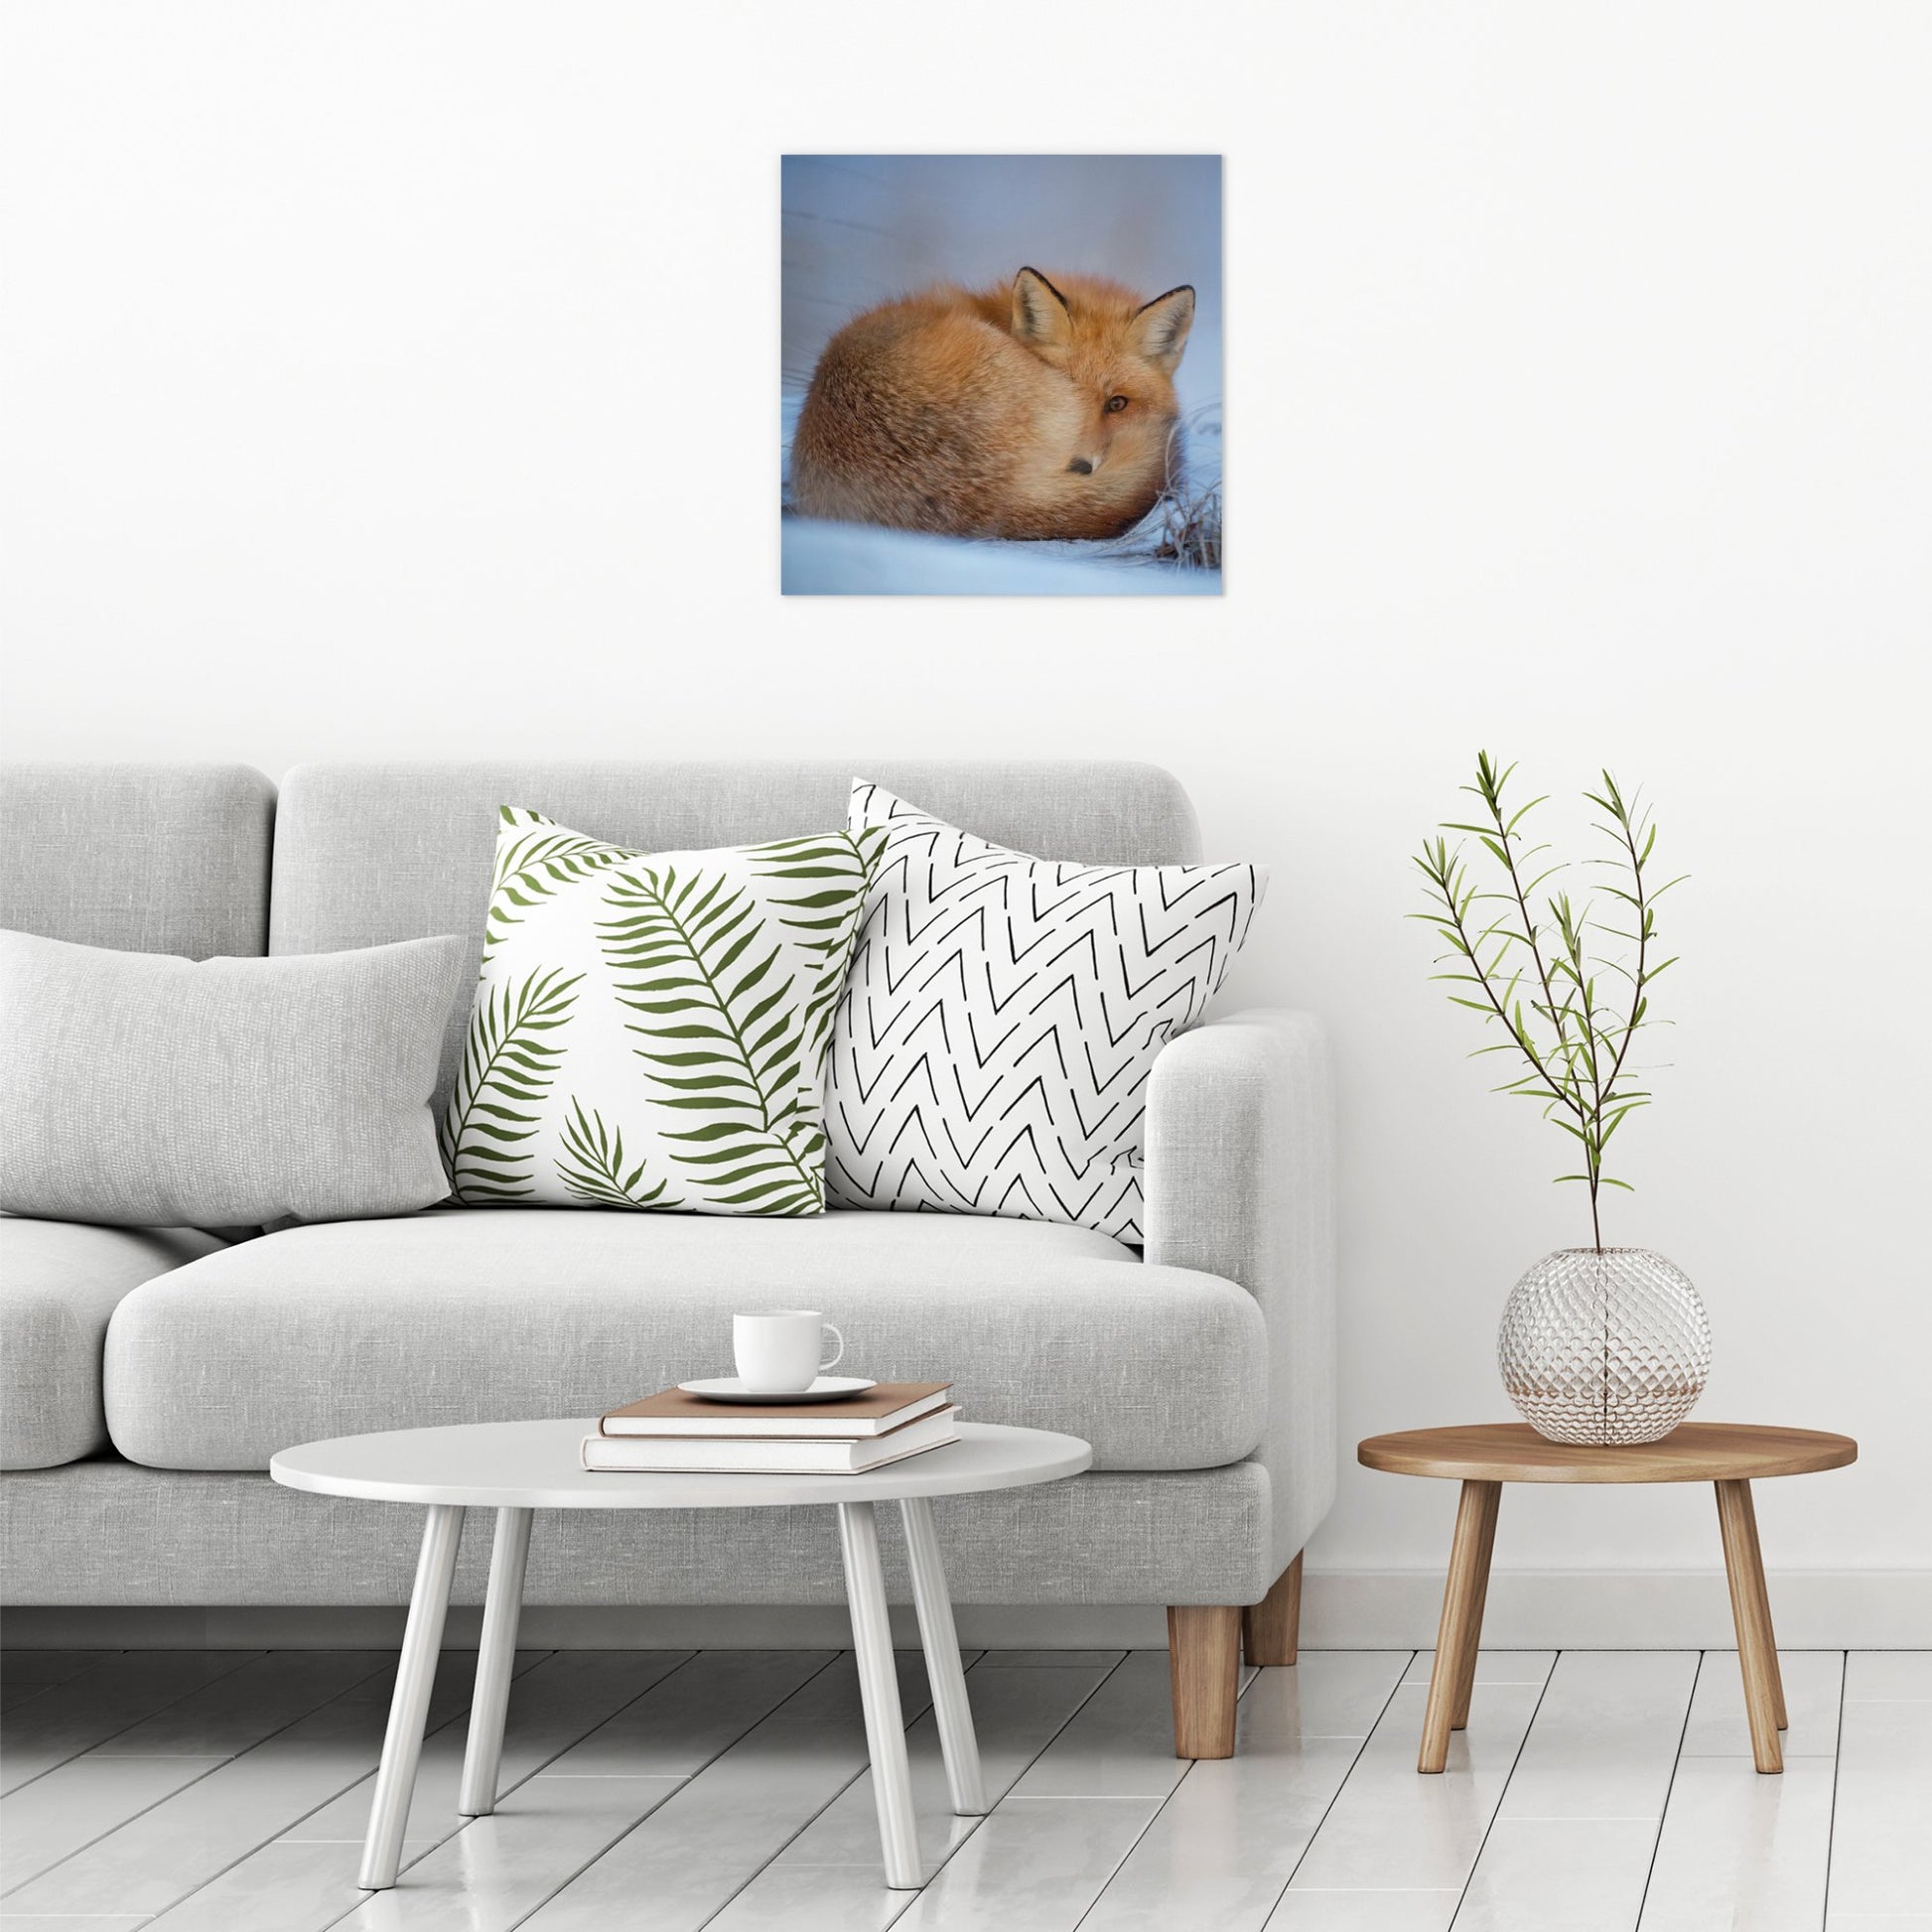 A contemporary modern room view showing a large size metal art poster display plate with printed design of a A Cute Fox in the Snow